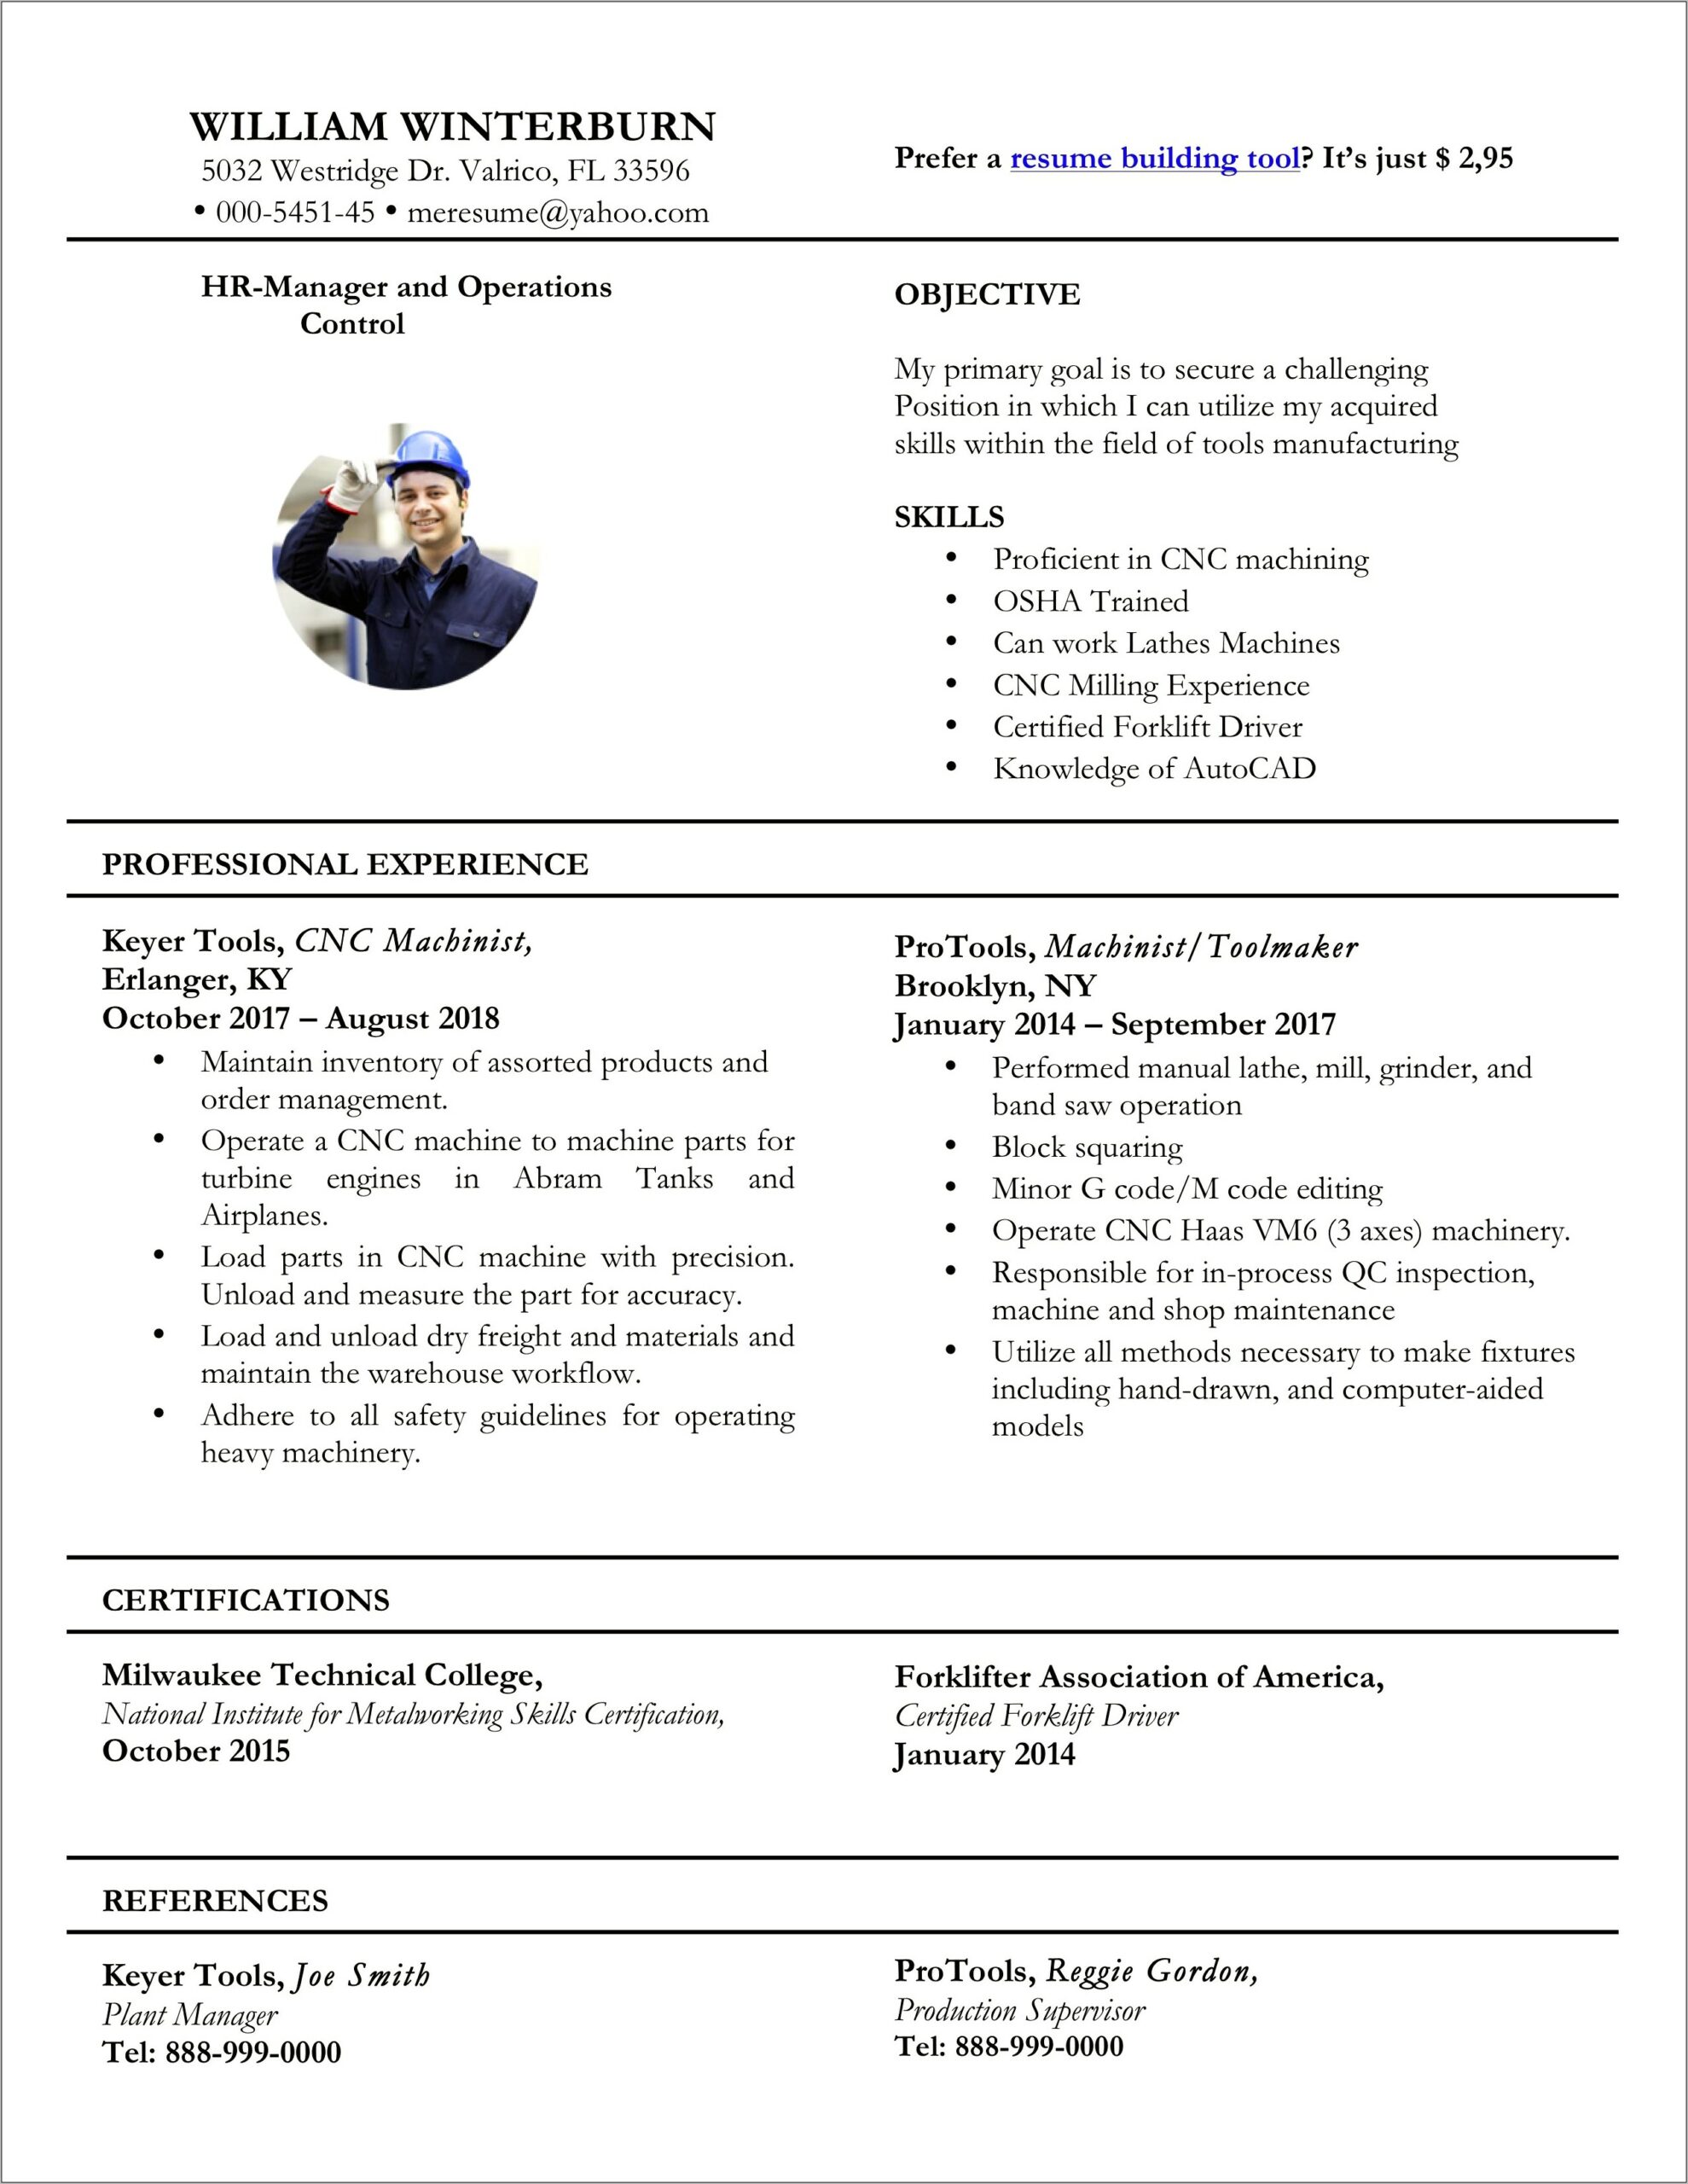 Resume Examples I Can Copy And Paste